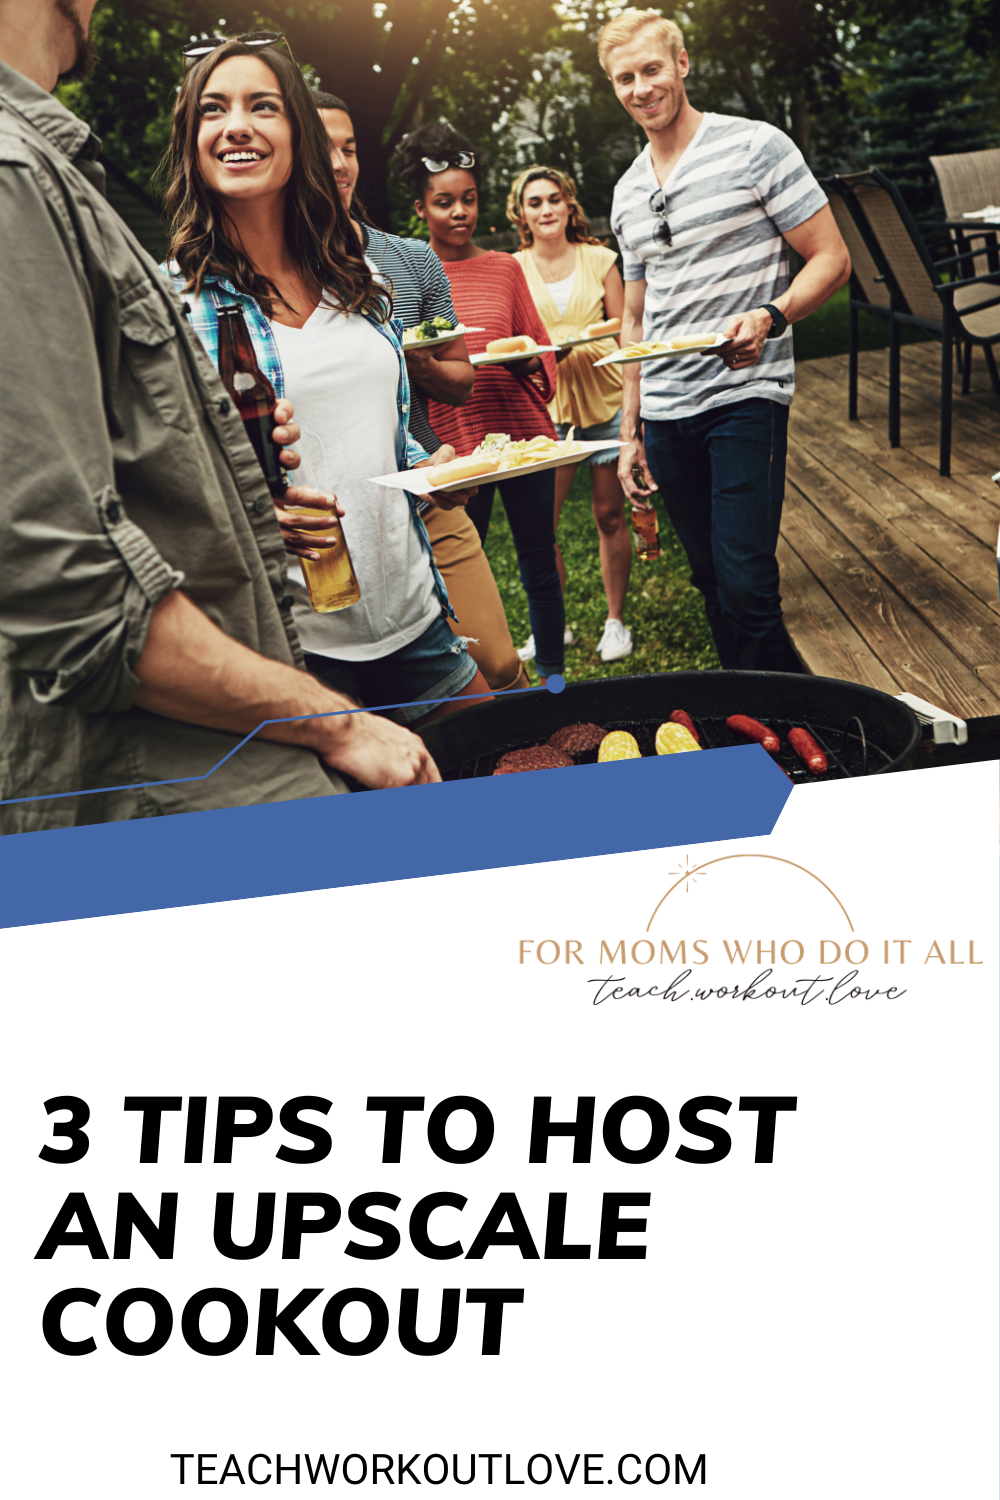 You can elevate a simple meal held outdoors into an elegant evening with good food, good wine, and great company. If you have some space outside and some elegant rattan patio furniture, then you are already halfway there to hosting an upscale cookout. In this article, we will go over several tips.